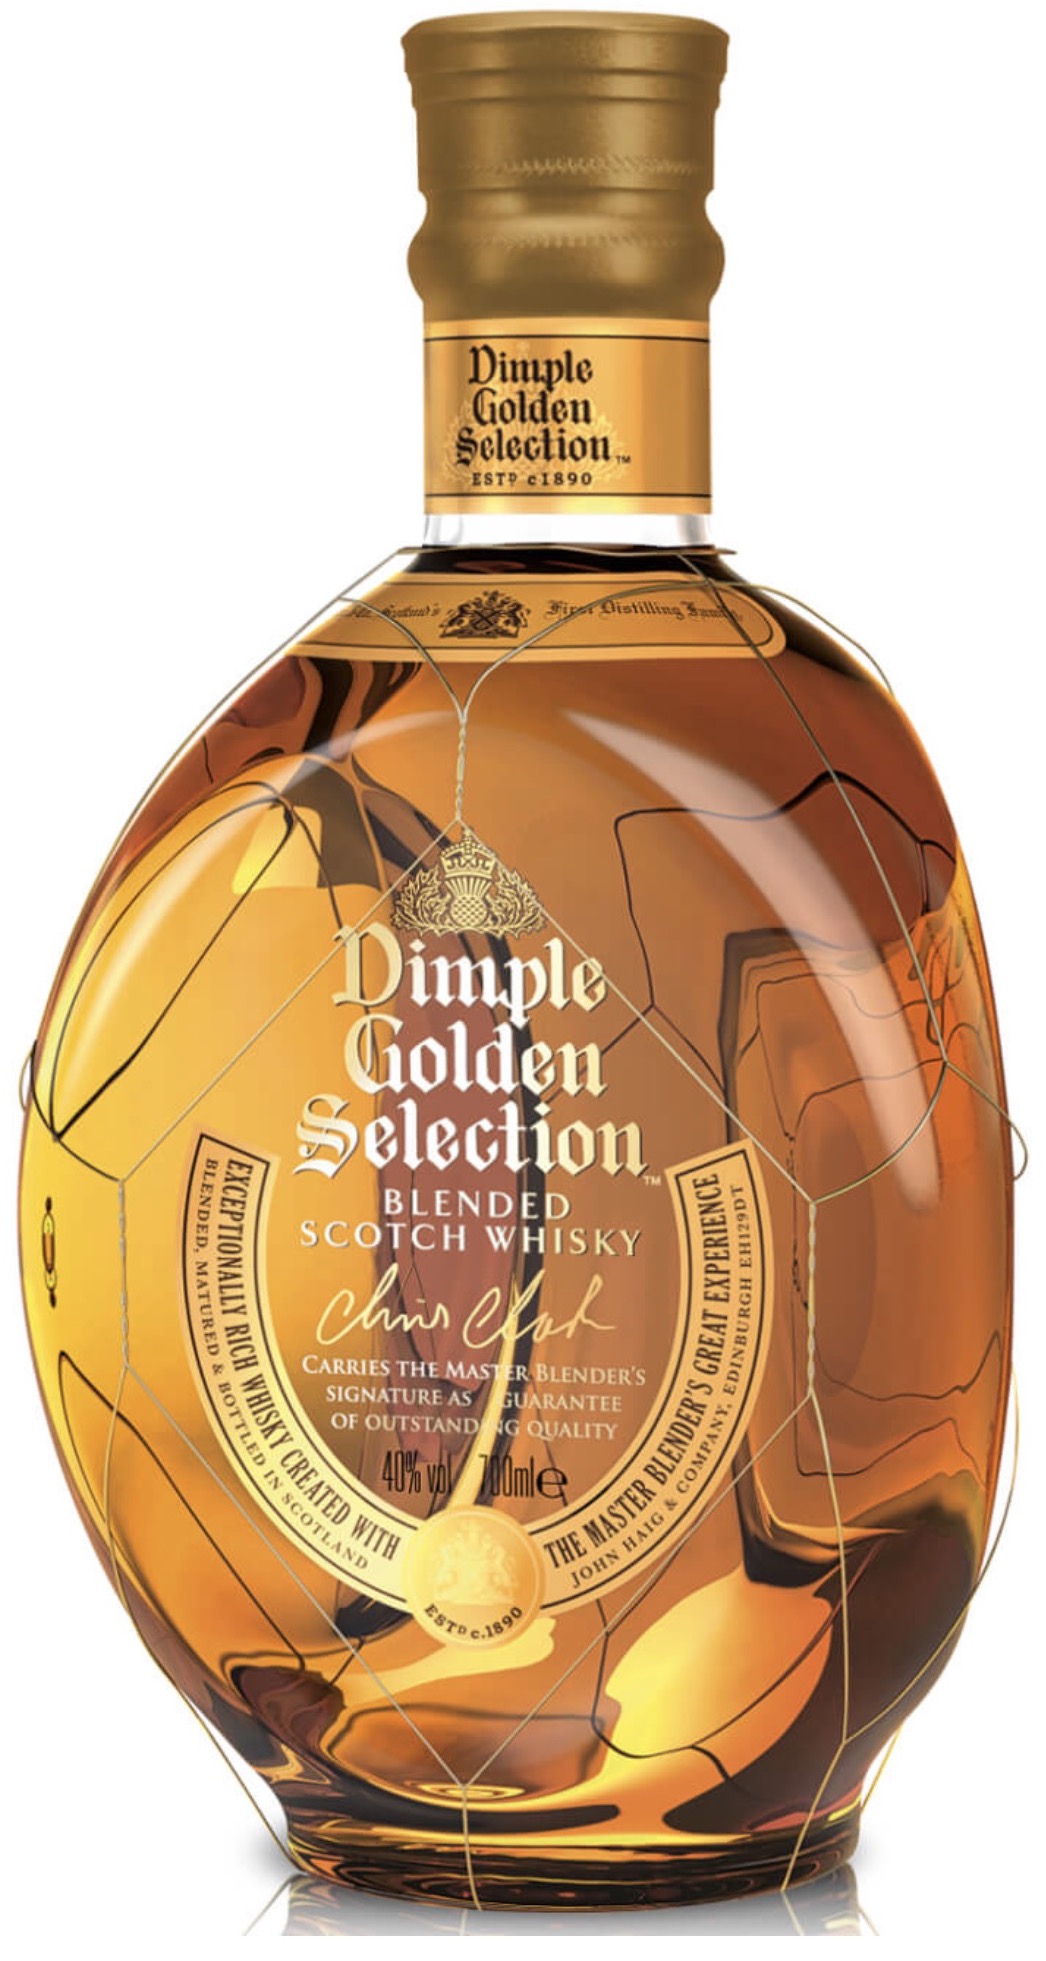 Dimple Gold Selection blended Scotch Whisky GP 40% 0,7L